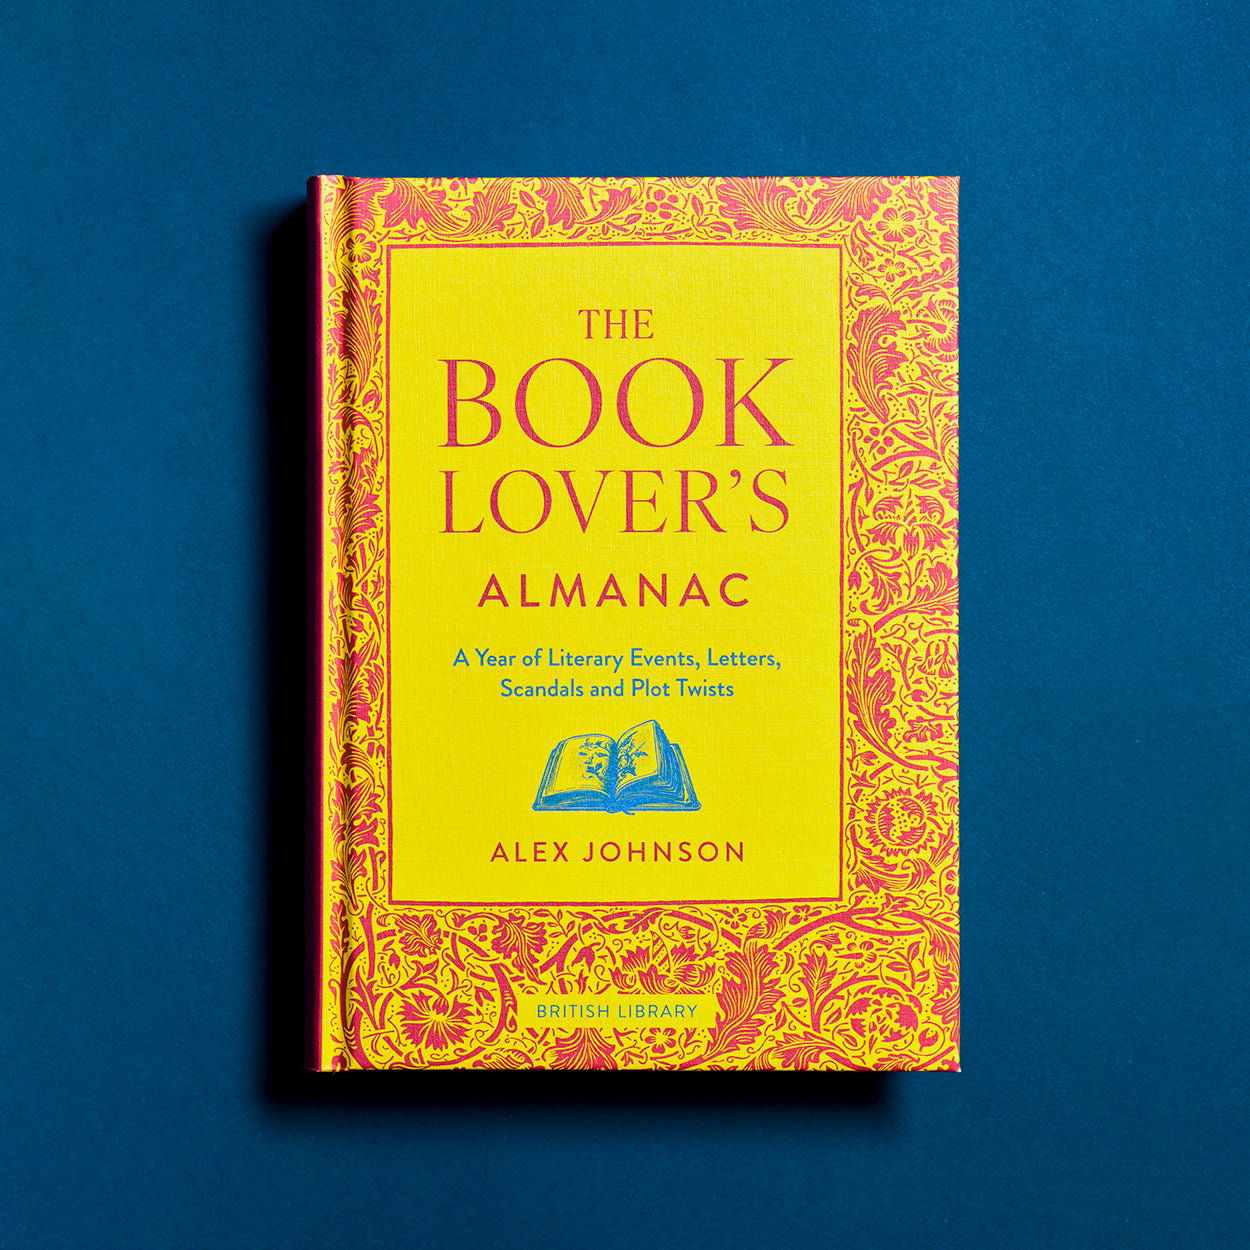 The Book Lover's Almanac: A Year of Literary Events, Letters